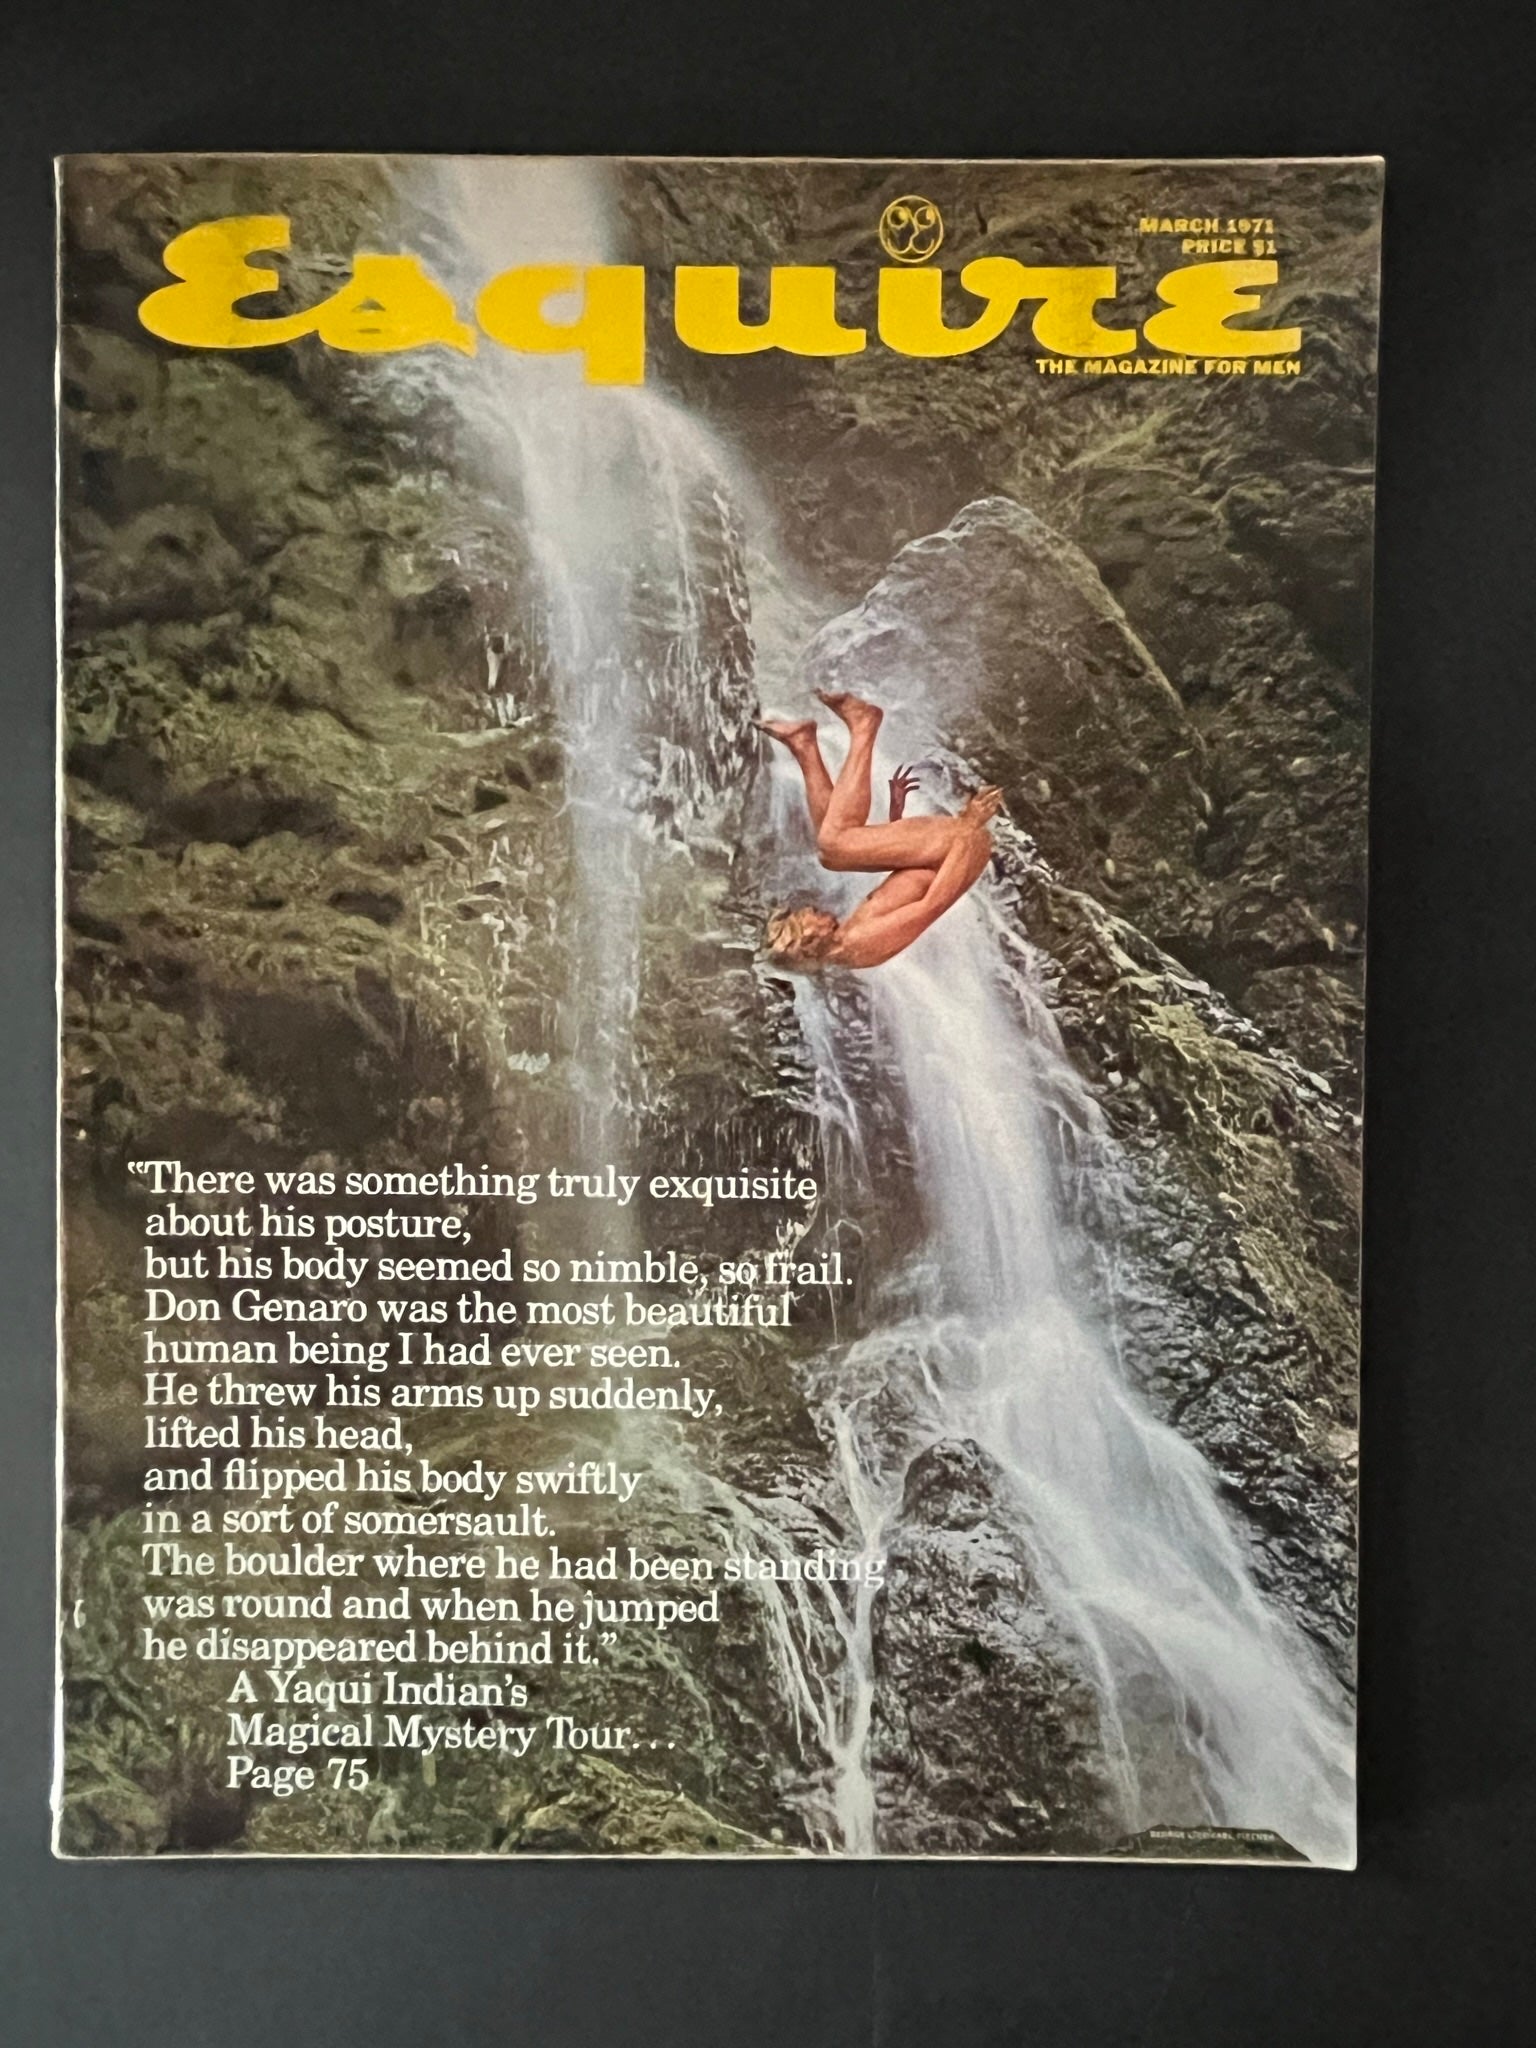 Esquire Magazine March 1971 - 'A Yaqui Indian's Magical Mystery Tour' Cover-CropsyPix